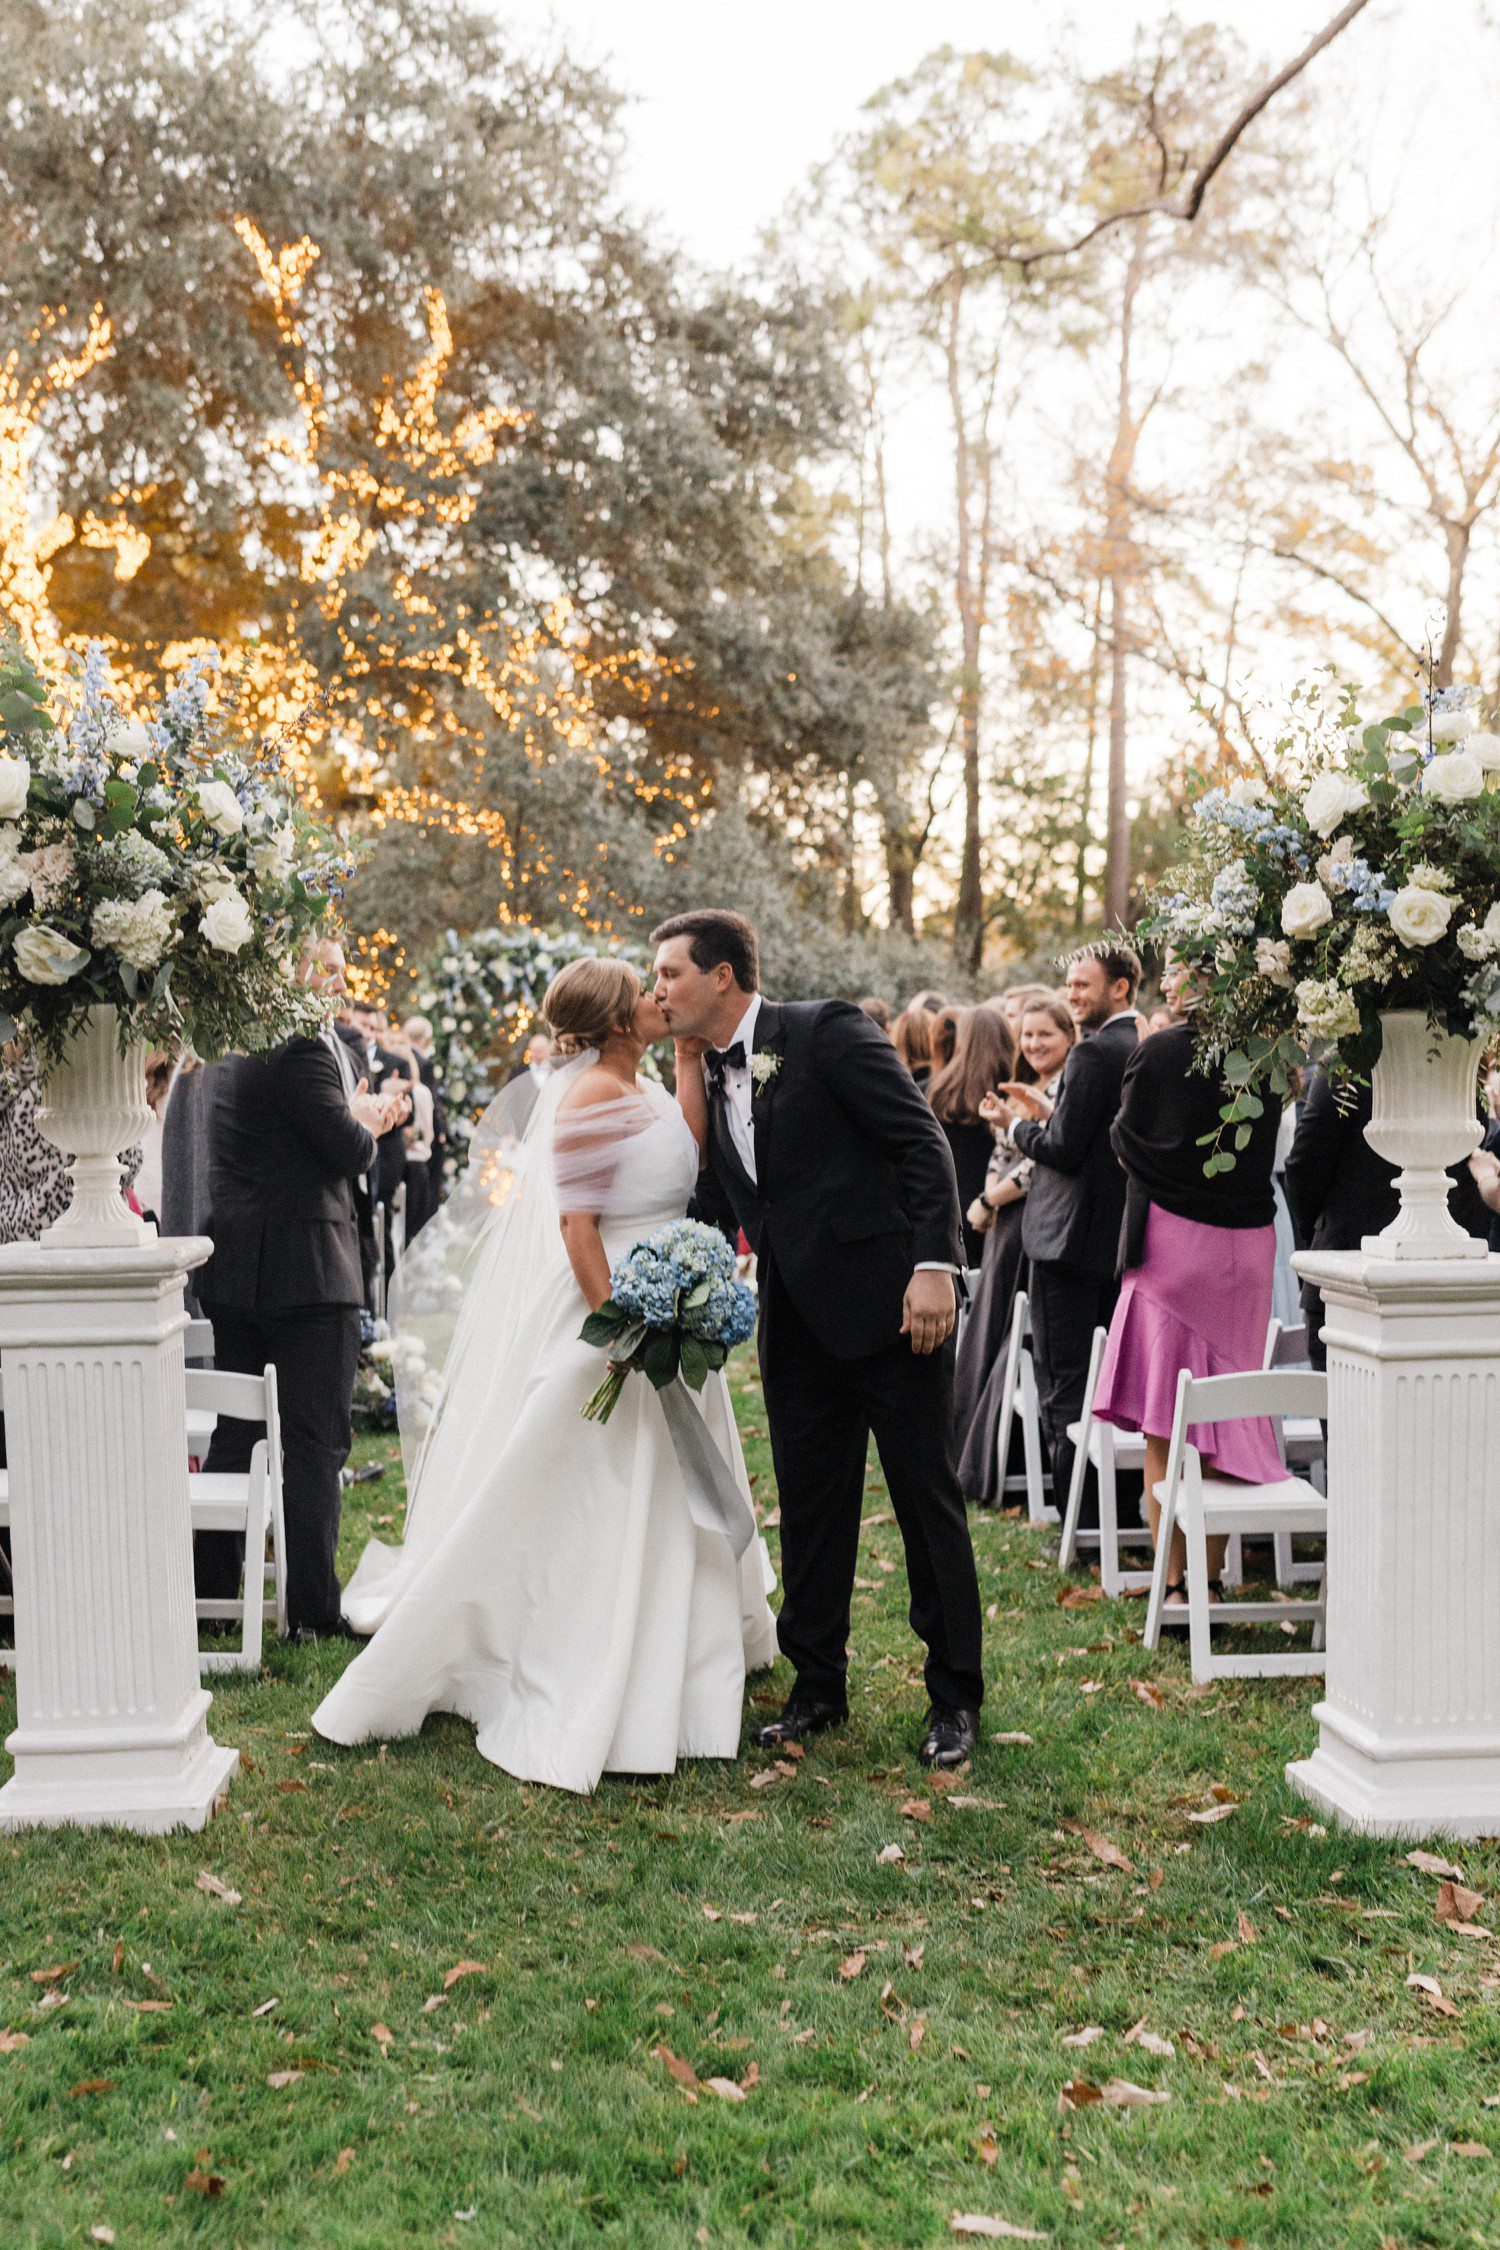 Outdoor wedding at The Houstonian Hotel. 